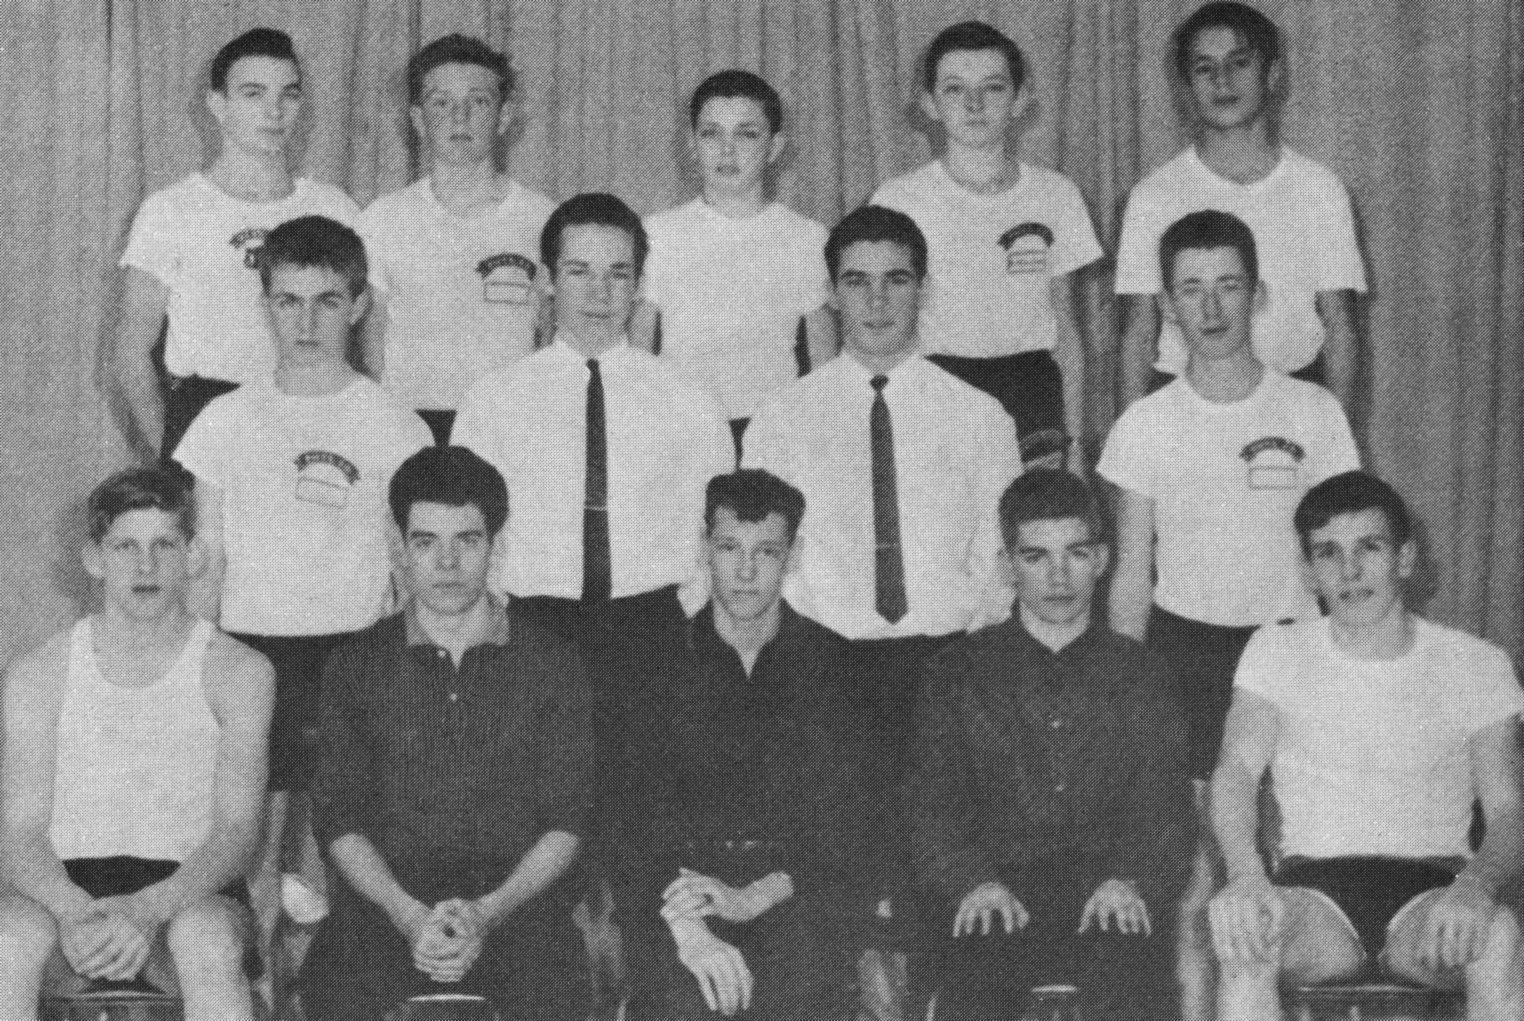 (Click to magnify) FRONT ROW: E. Vandenberg, G. Beacock, Brian Myers, Keith McFarlane, Gord Whitney; SECOND ROW: C. Wilson, Bill Menar, R. Long, Keith St.John; BACK ROW: P. Faulkner, M. Smith, Mike Morrison, Grant Mustard, Maurice VanVeghal